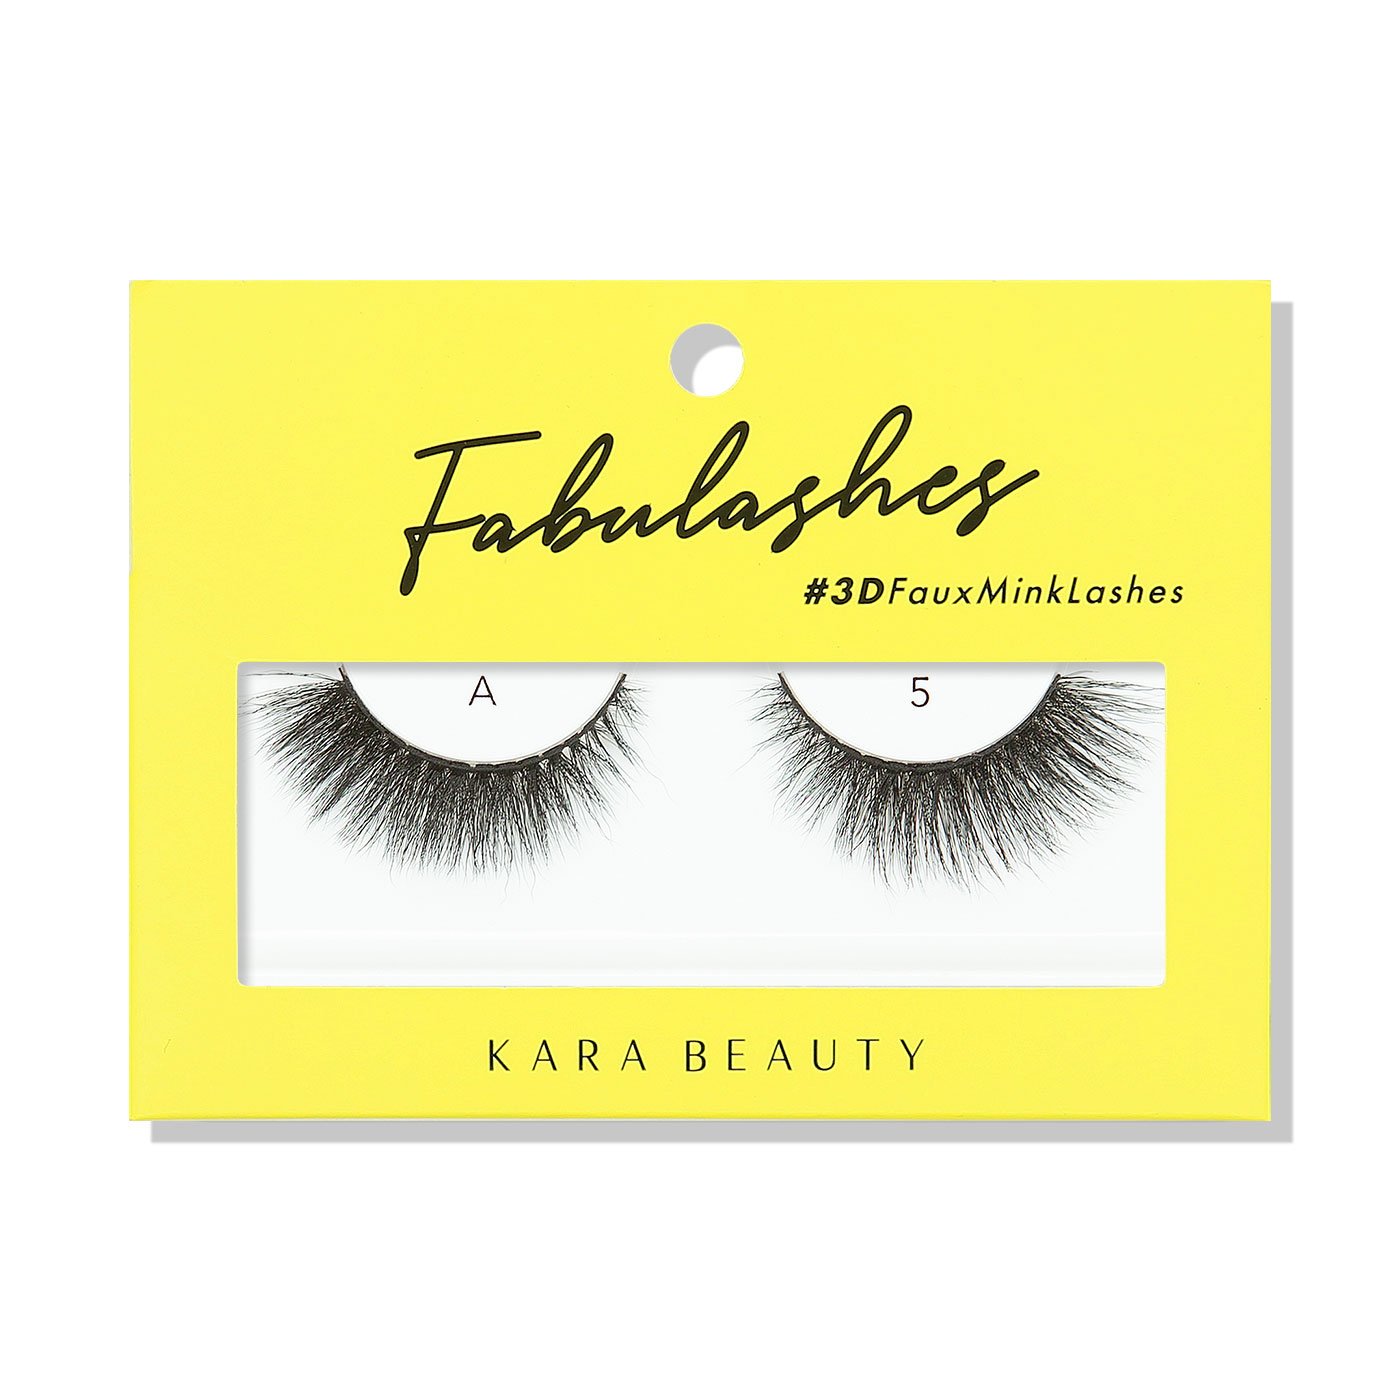 Kara Beauty's Fabulashes 3D Faux Mink Lashes  in style A5 